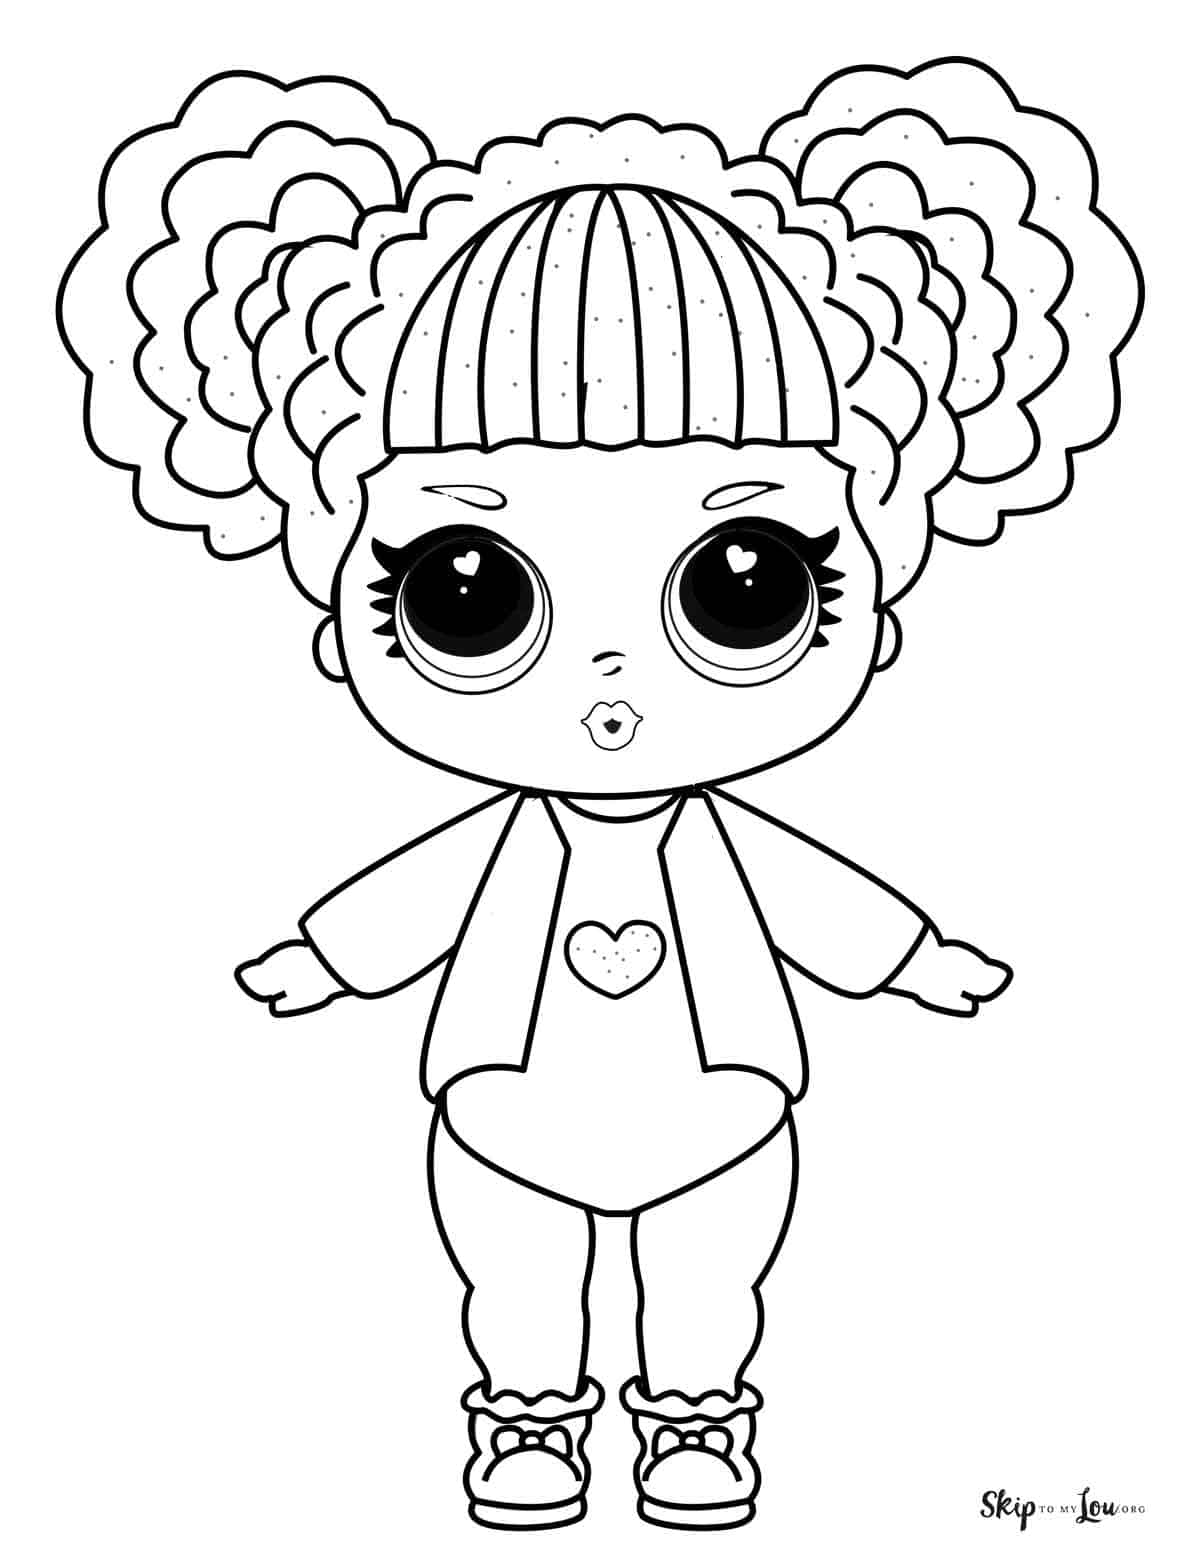 Lol coloring pages skip to my lou